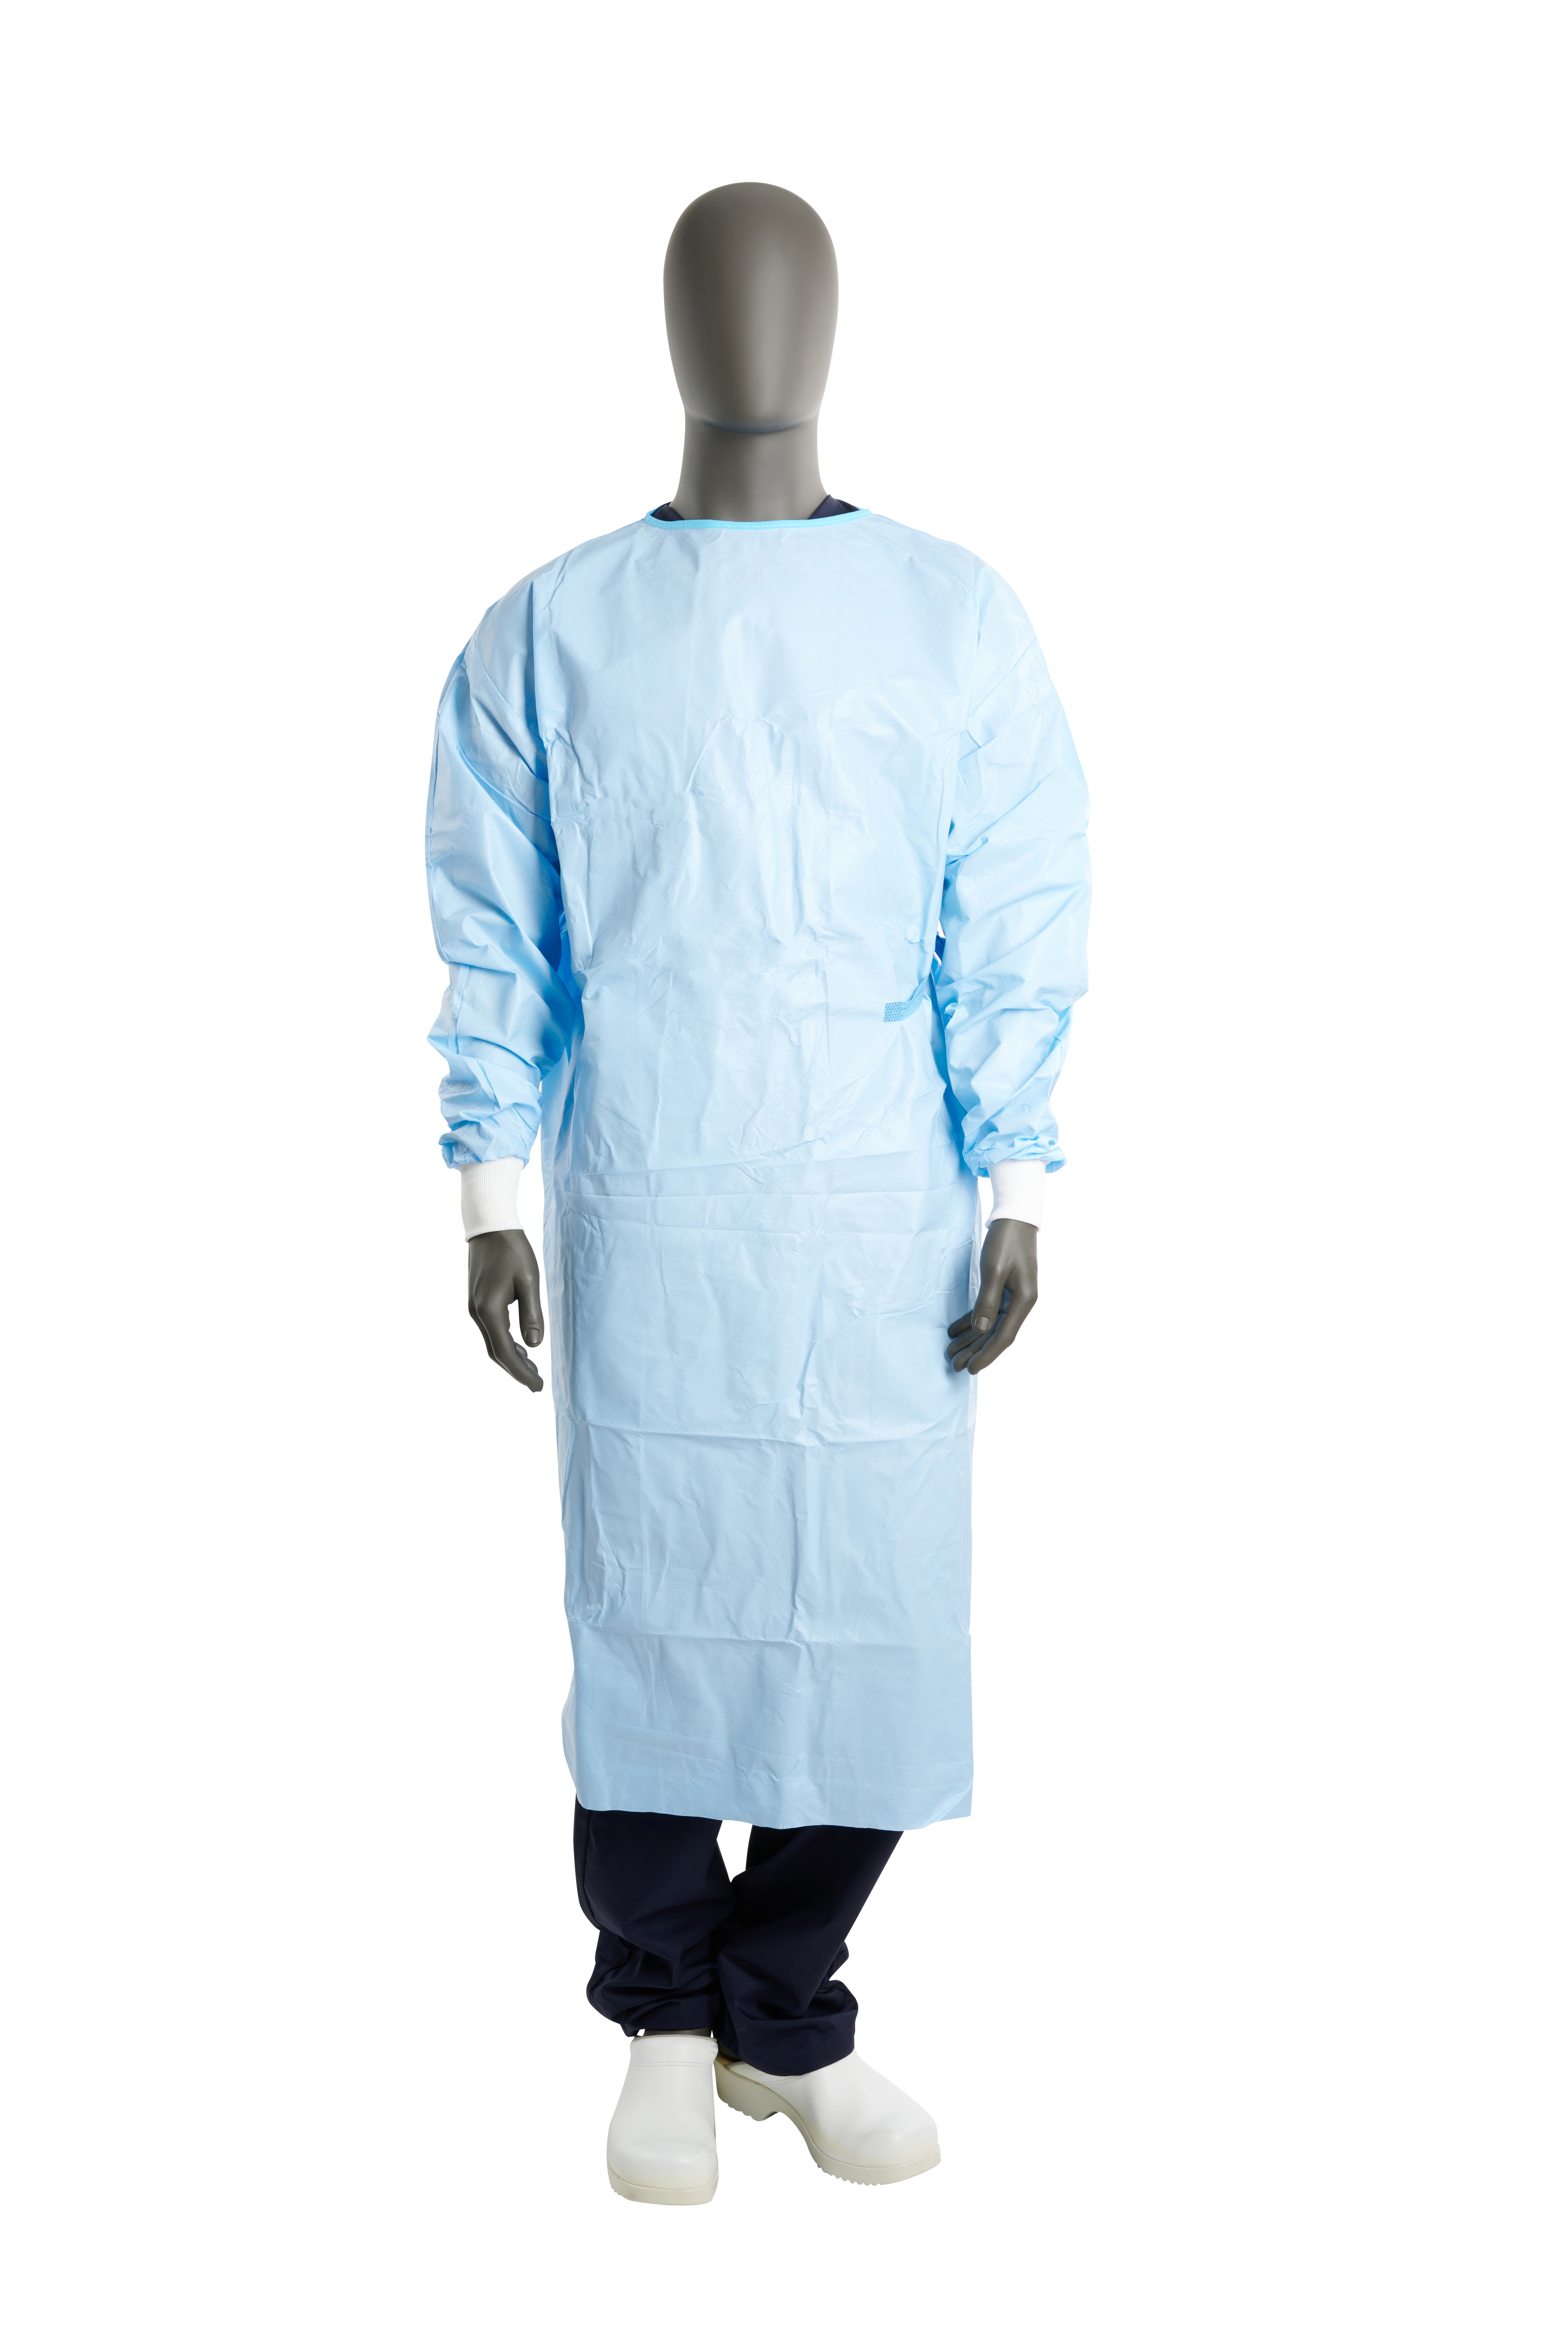 KRUUSE Disposable Reinforced Surgical Gown, XL, 25/pk
